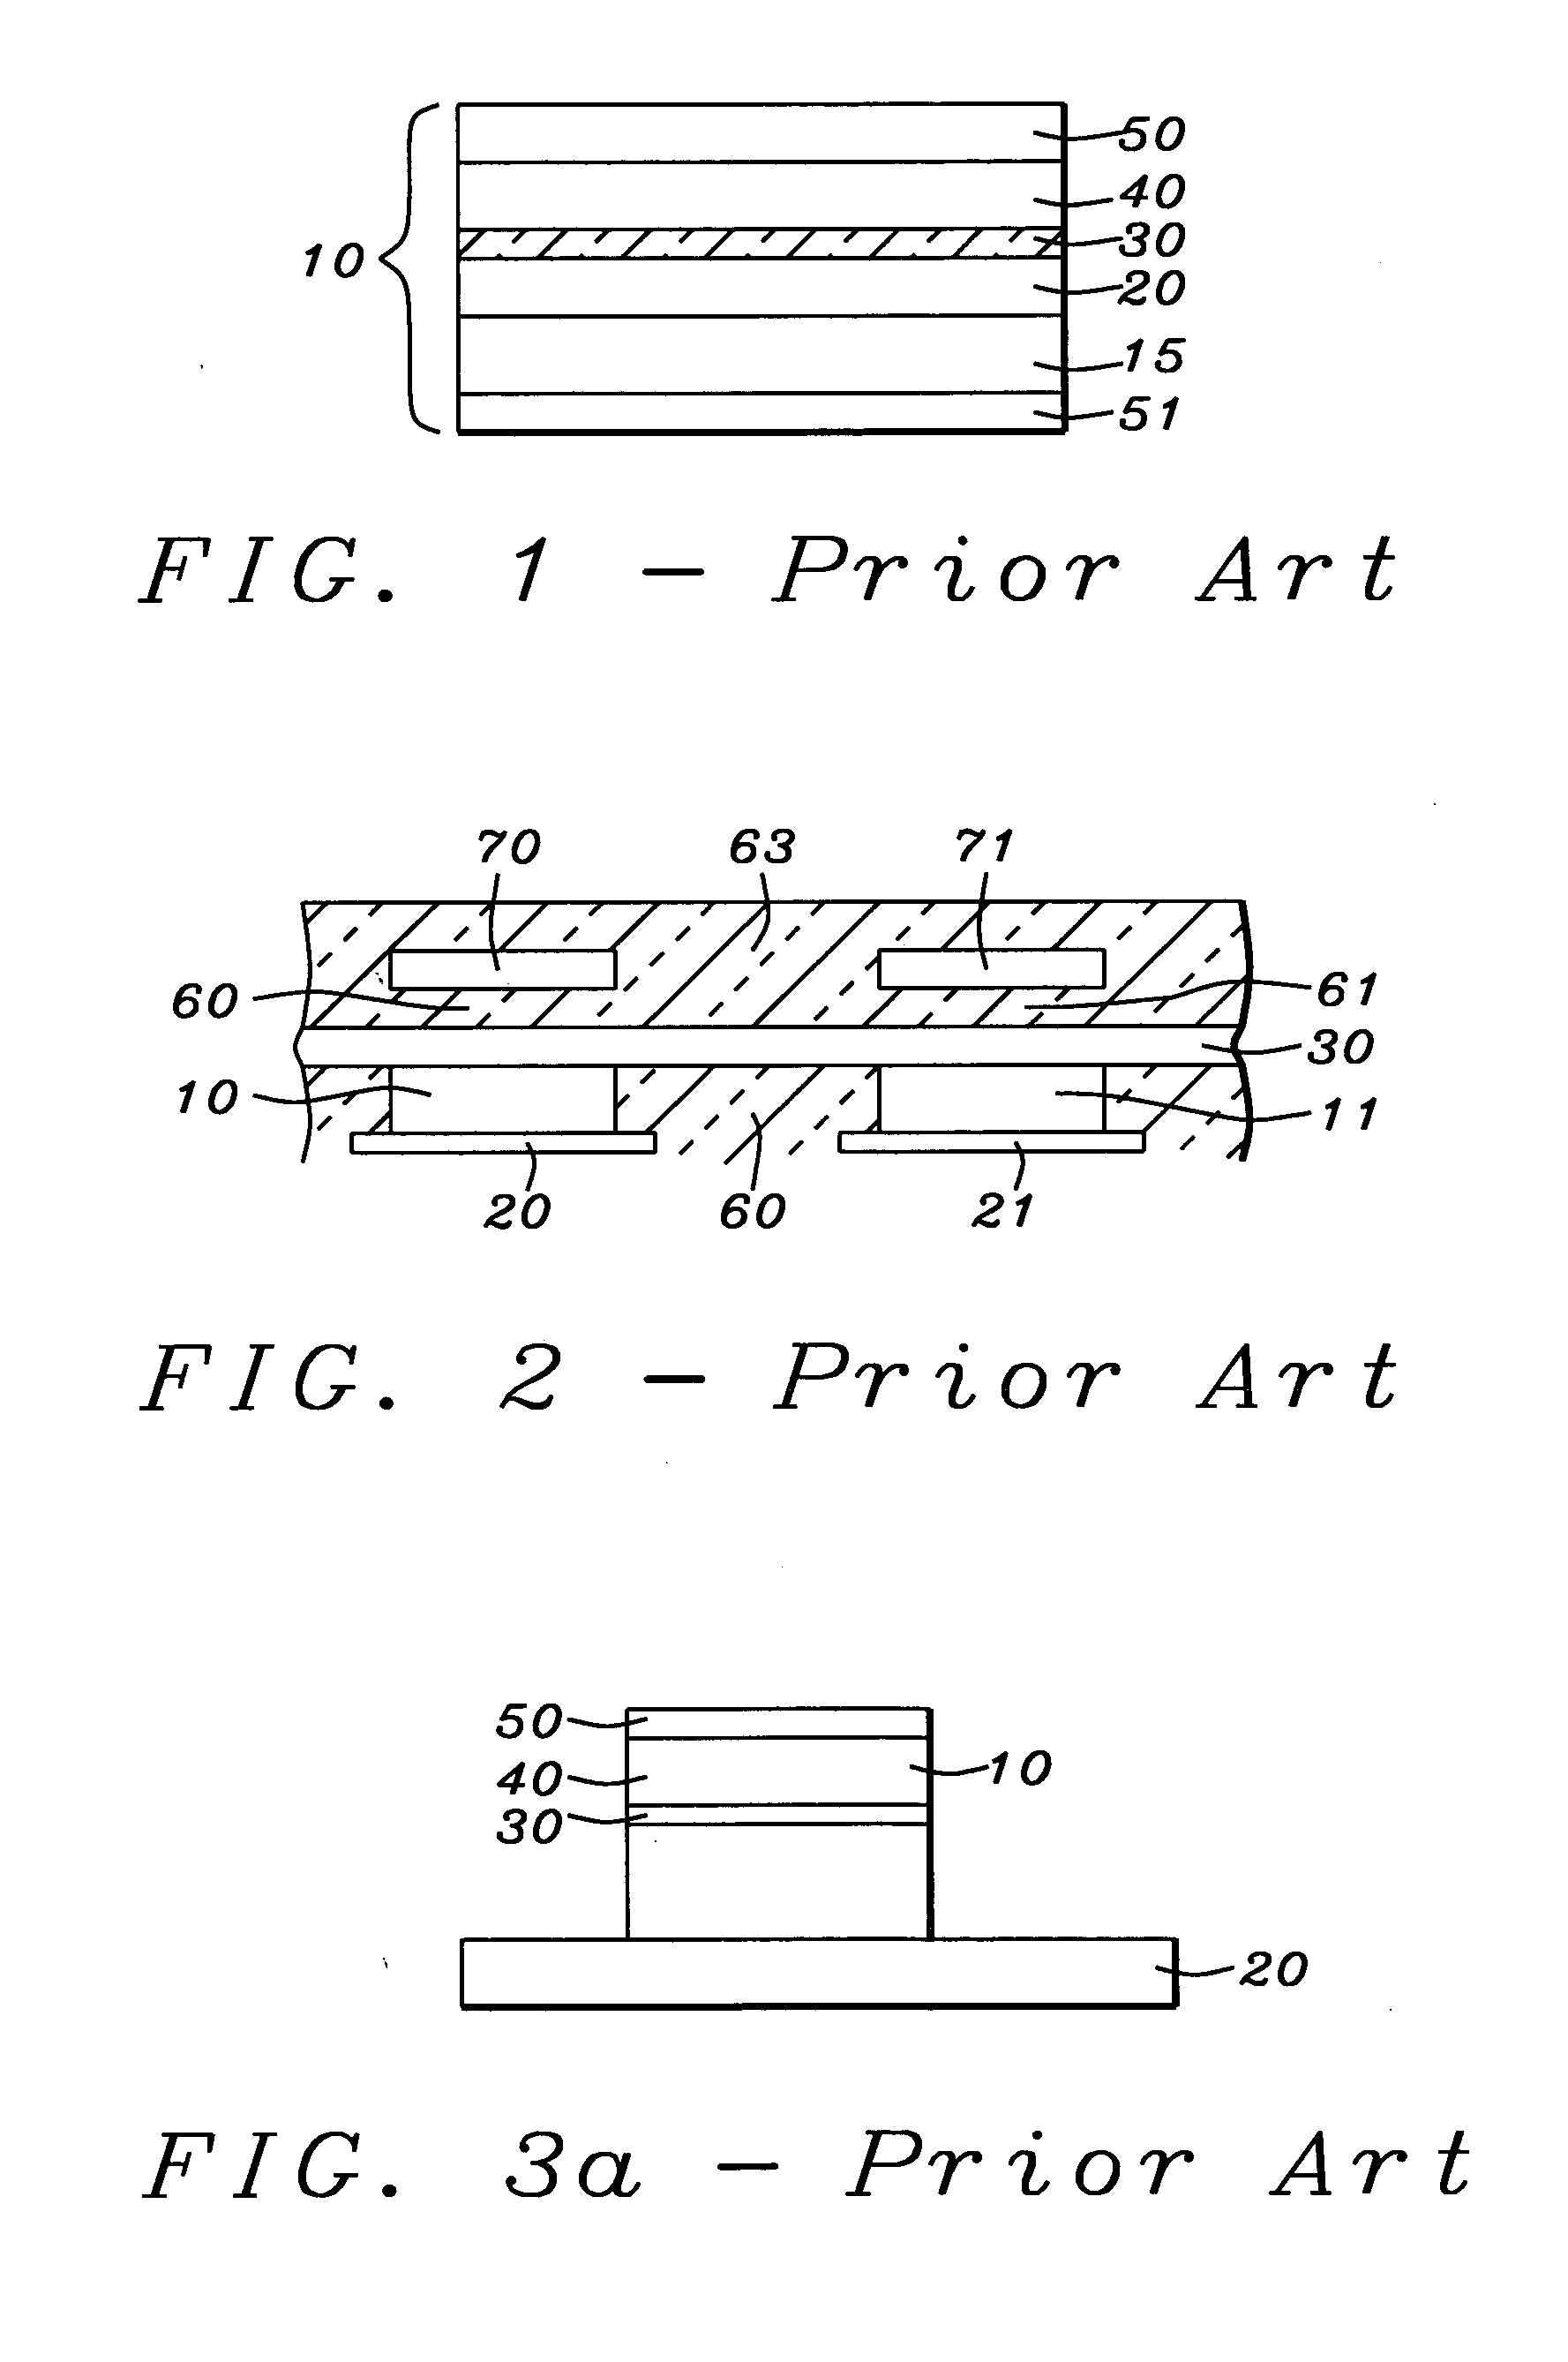 Spacer structure in MRAM cell and method of its fabrication